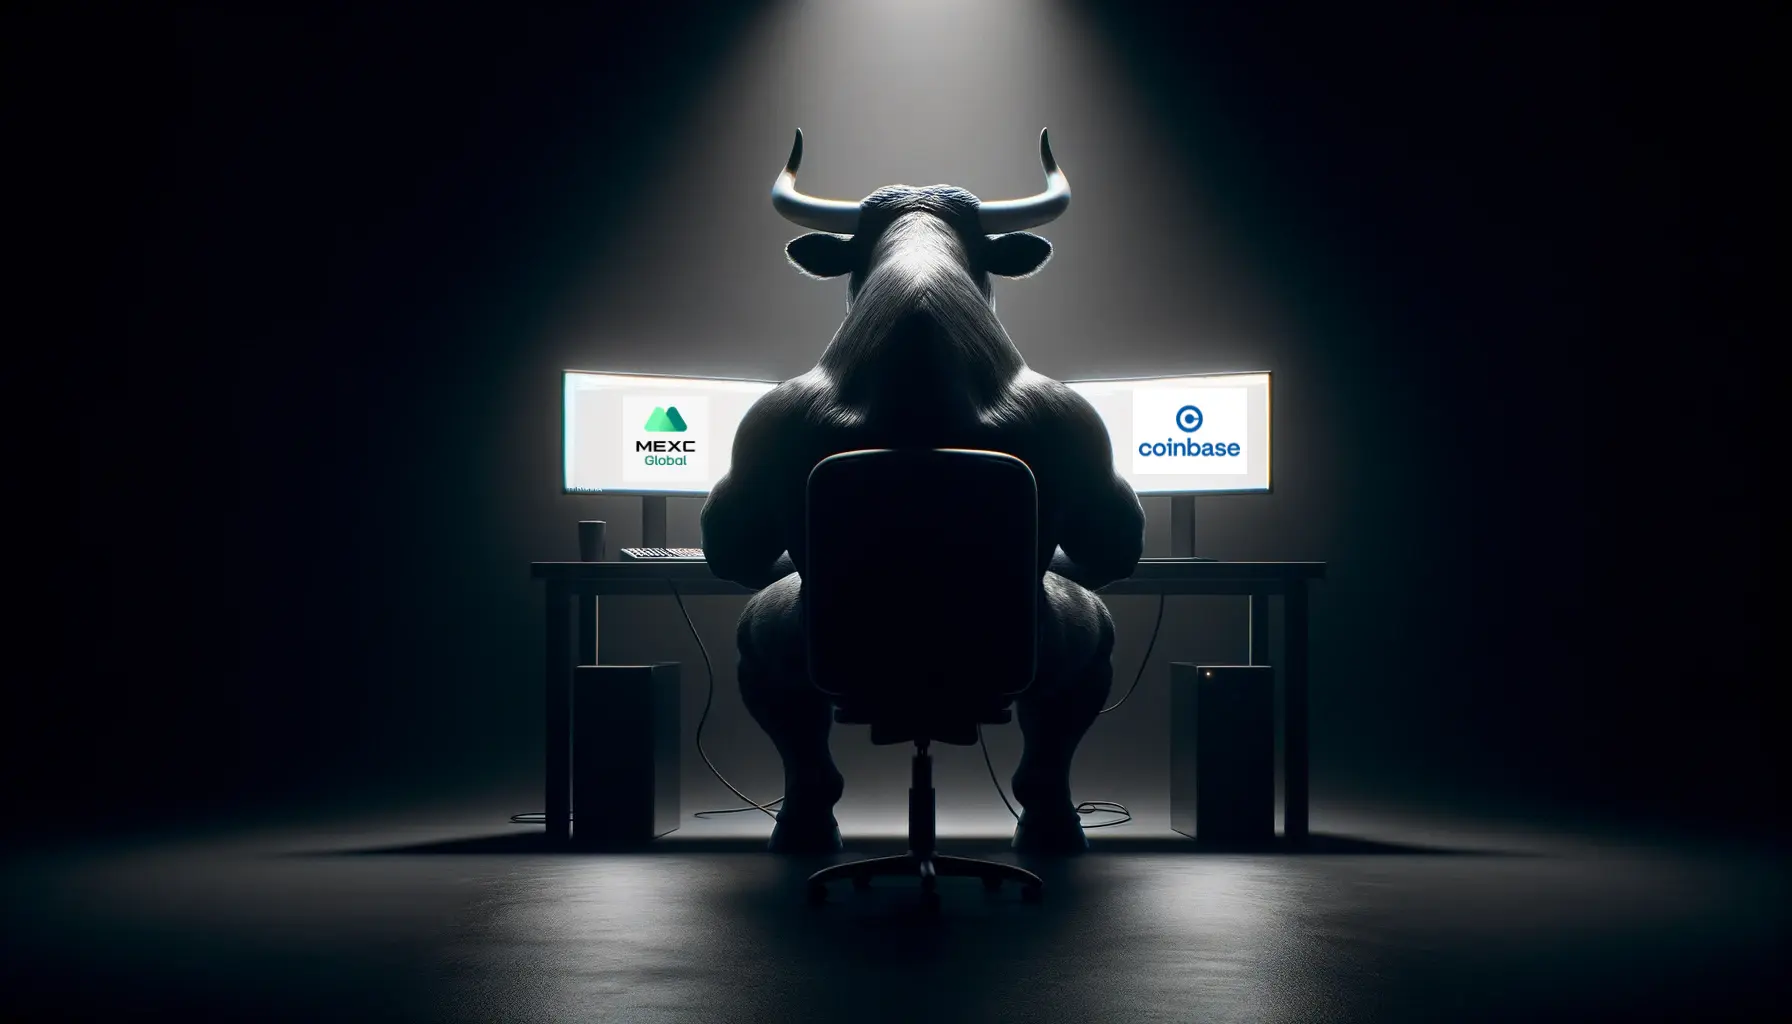 Silhouetted bull sitting at a desk with monitors displaying MEXC and Coinbase logos, symbolizing trading strength and Coinbase vs MEXC.